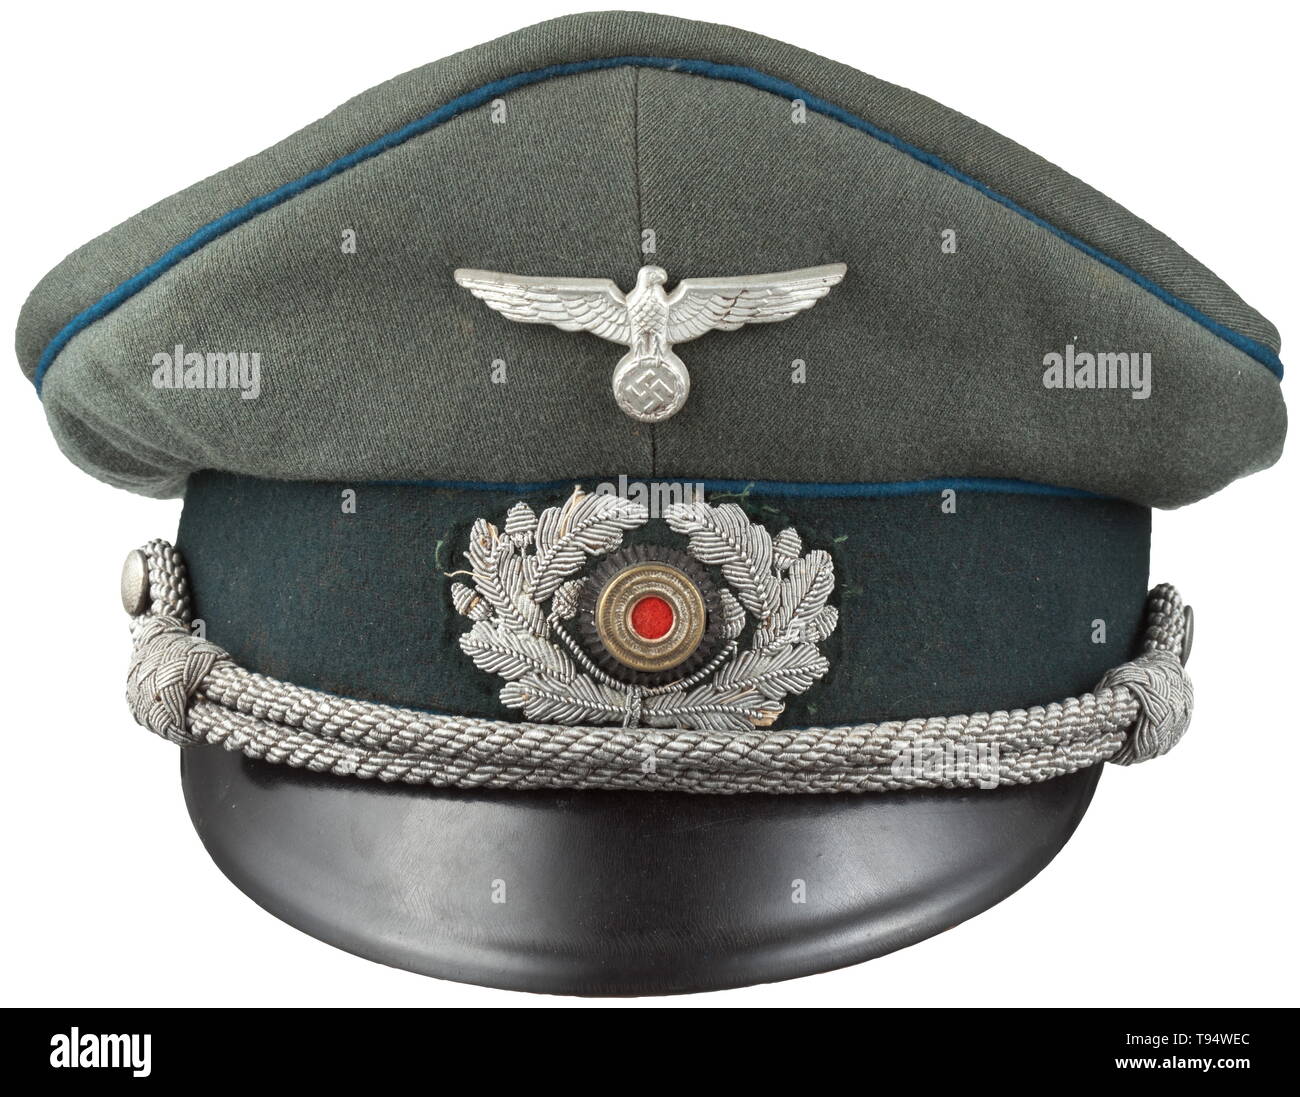 A visor cap for officers of the administrative and judicial special service maker August Müller, Munich Private purchase piece of field-grey gabardine, dark green trim band, light blue piping (slight mothing), beige inner liner, beneath the cap trapezoid a maker's tag 'A.Müller München...', dark grey sweatband of replacement material, aluminium eagle, hand embroidered cap wreath with metal cockade, officer's cord. A lightly used cap with signs of age. historic, historical, army, armies, armed forces, military, militaria, object, objects, stills, clipping, clippings, cut out, Editorial-Use-Only Stock Photo